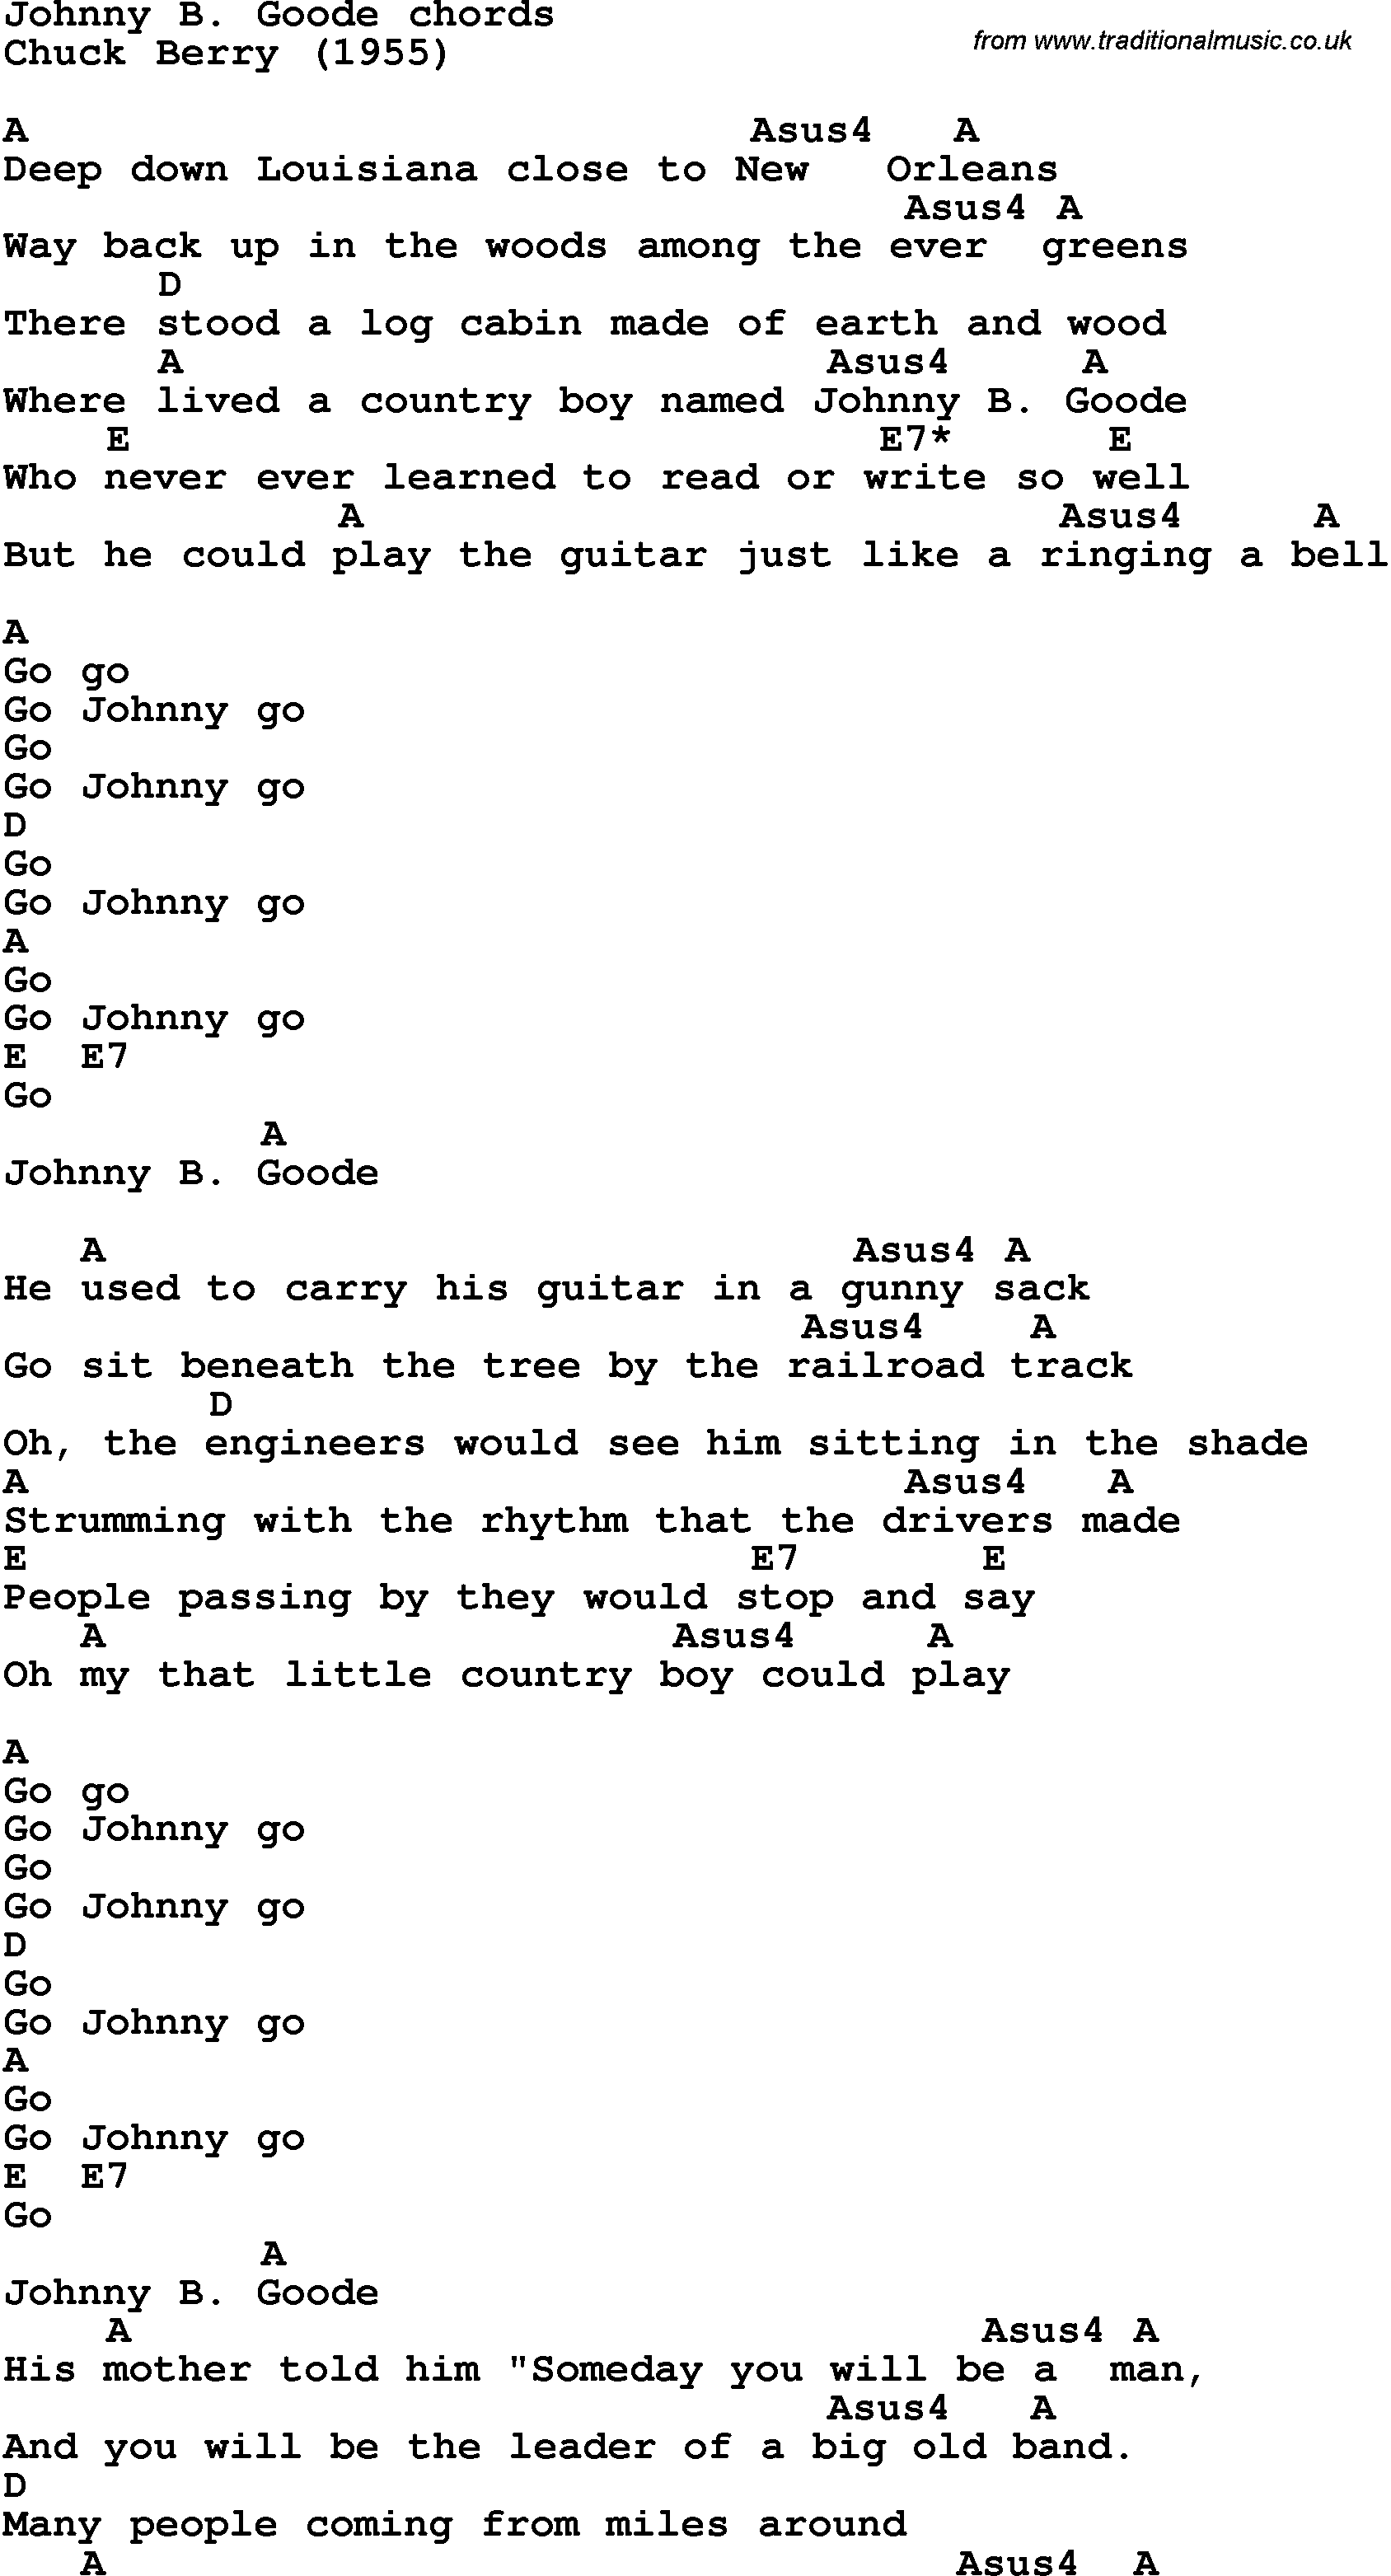 Song Lyrics with guitar chords for Johnny B